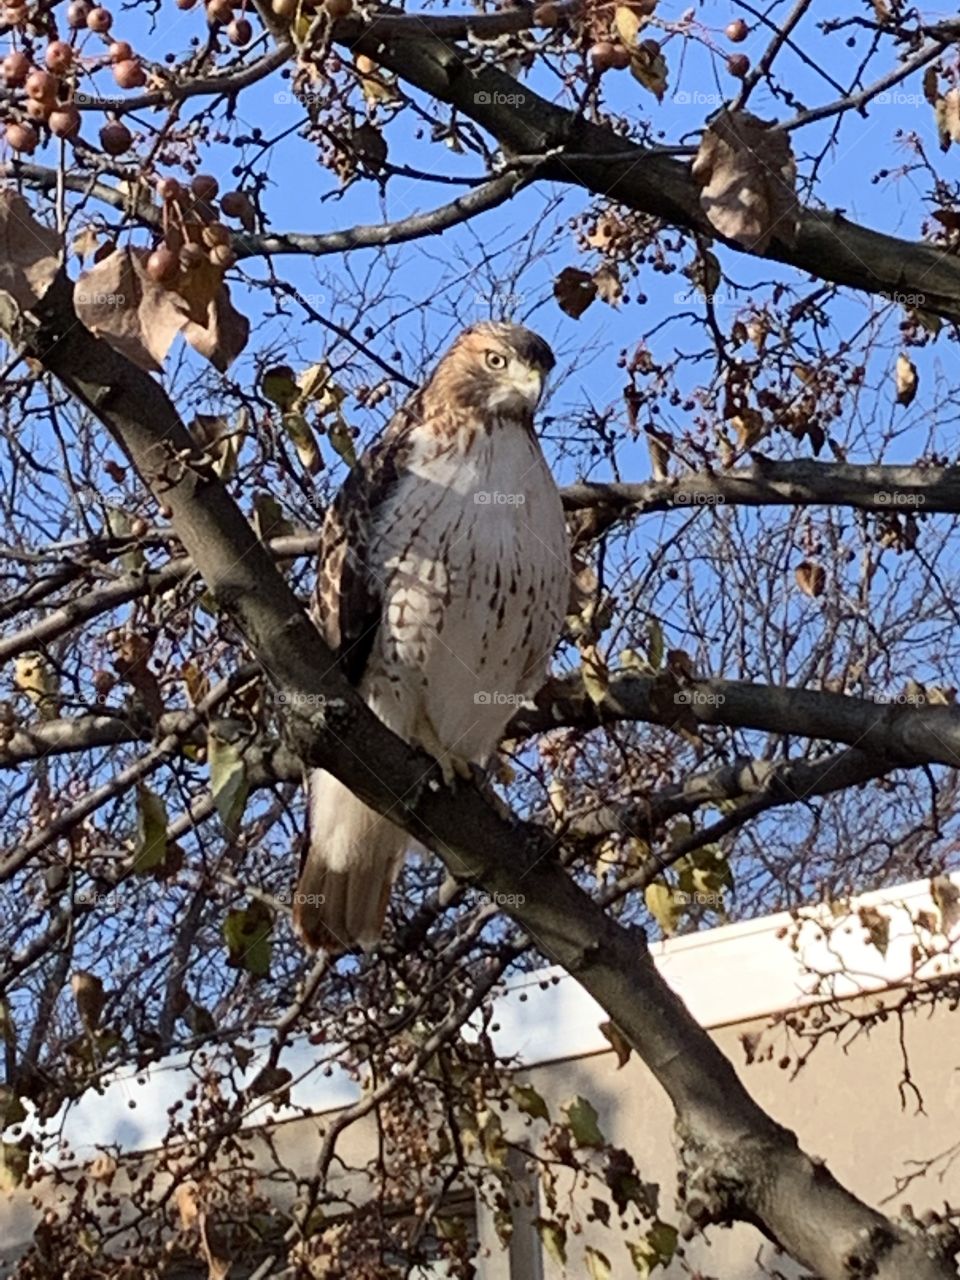 A second red-tailed hawk staring judgmentally at the many school children taking photos of it 